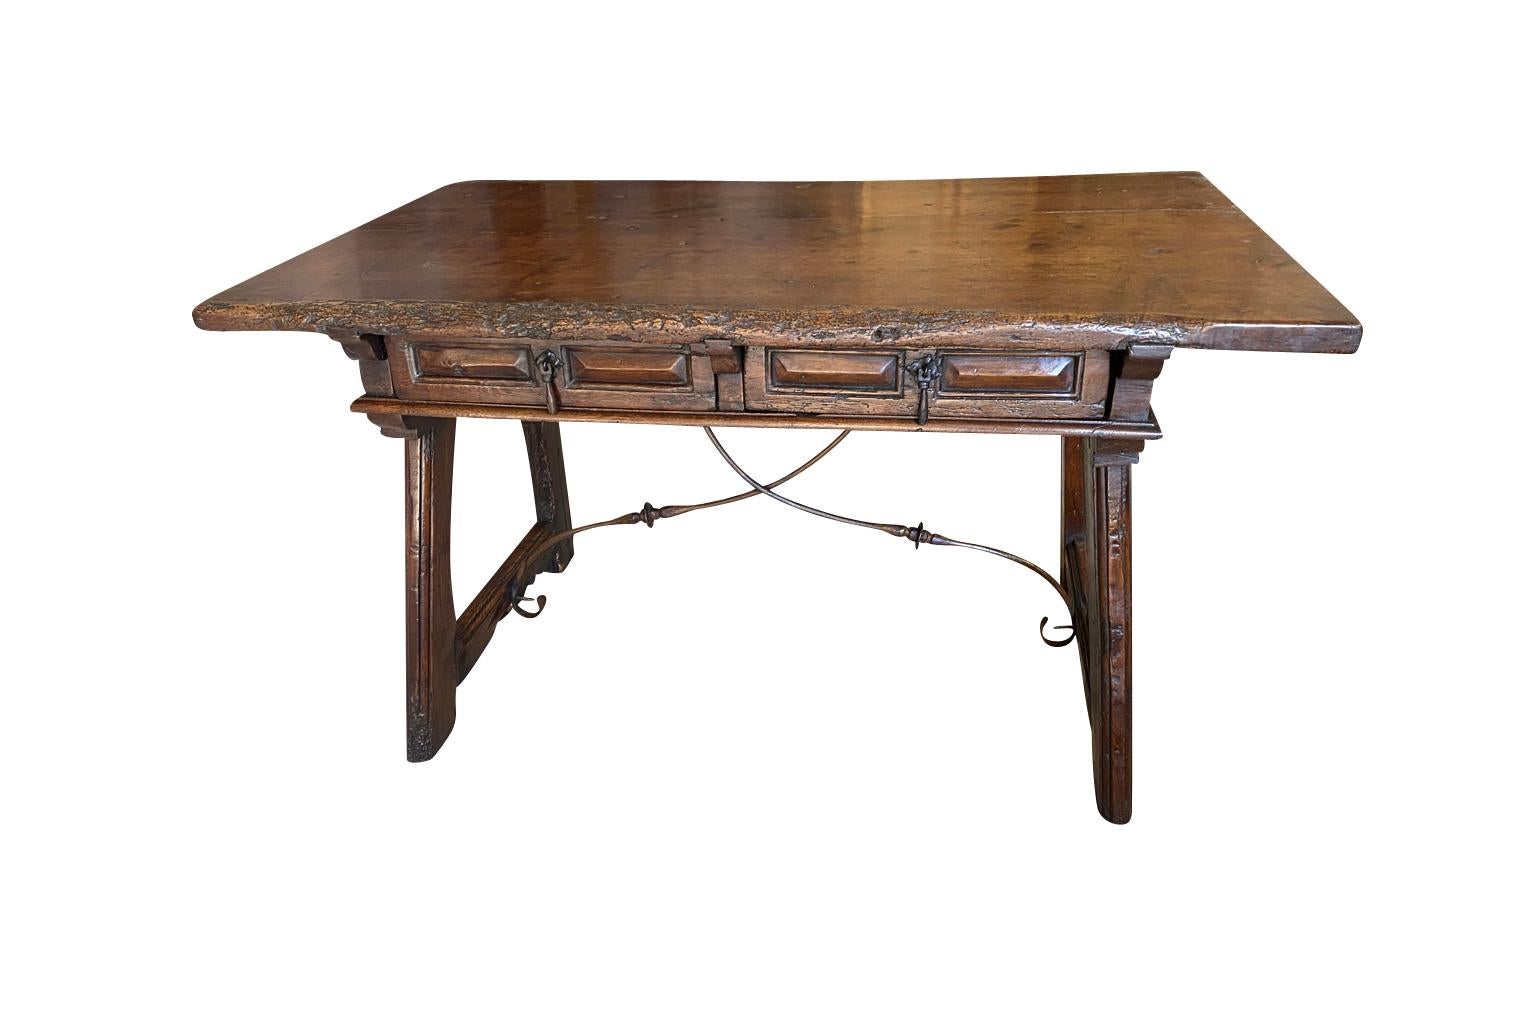 An outstanding and very handsome 17th century Spanish Writing Table - Desk from the Catalan region of Spain.  Beautifully constructed from stunning walnut & chestnut with drawers, a solid walnut board top and hand forged iron stretchers.  Sumptuous